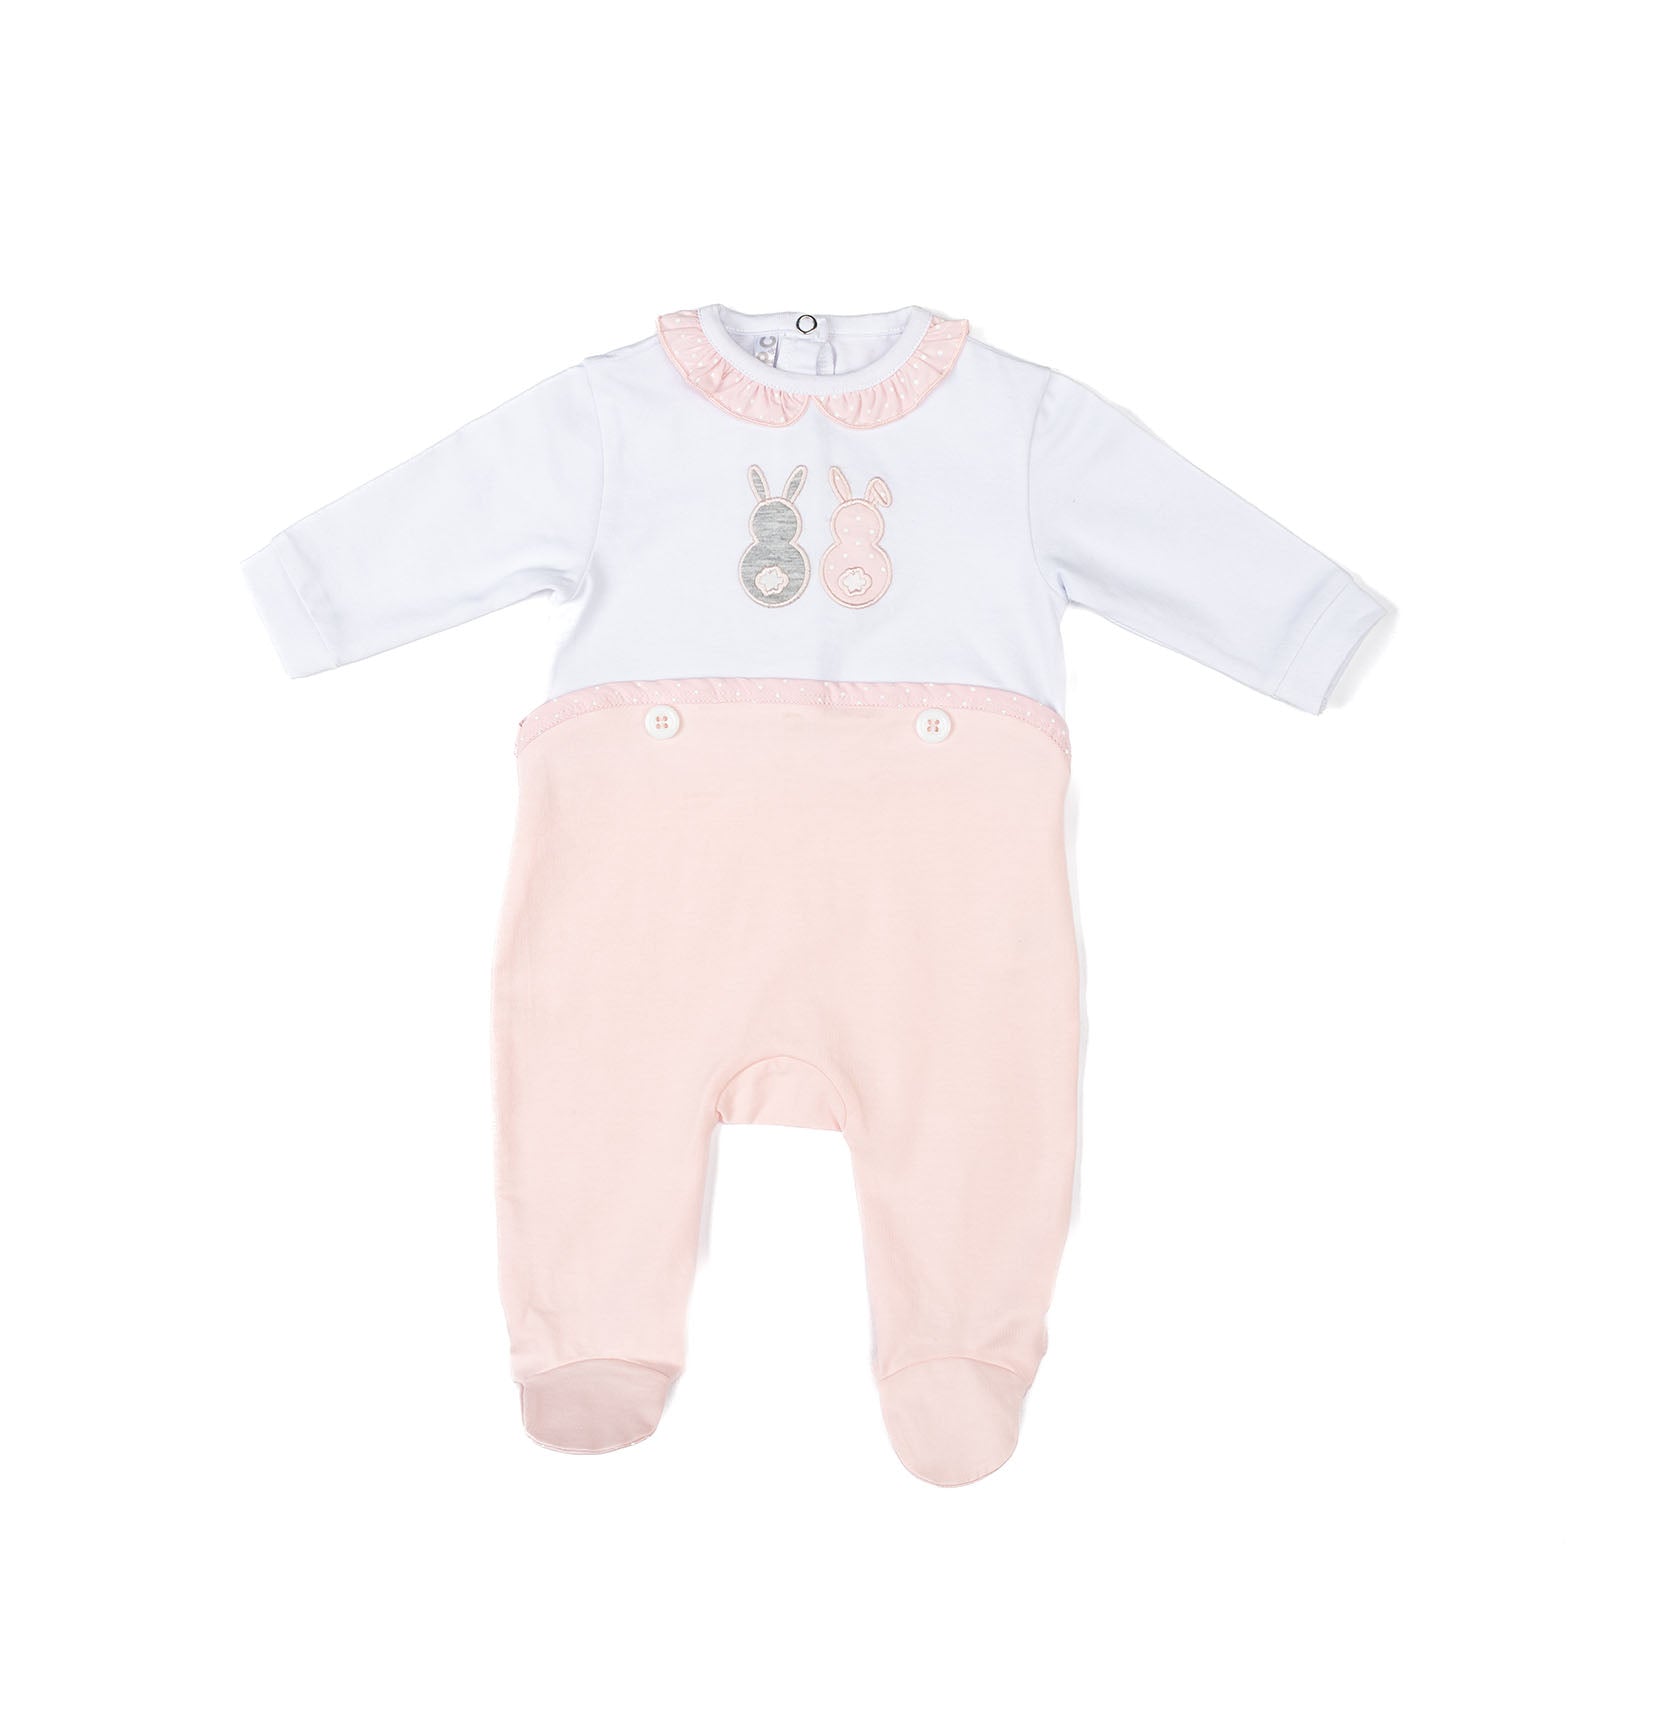 Cute bunny baby girl romper by Pompelo